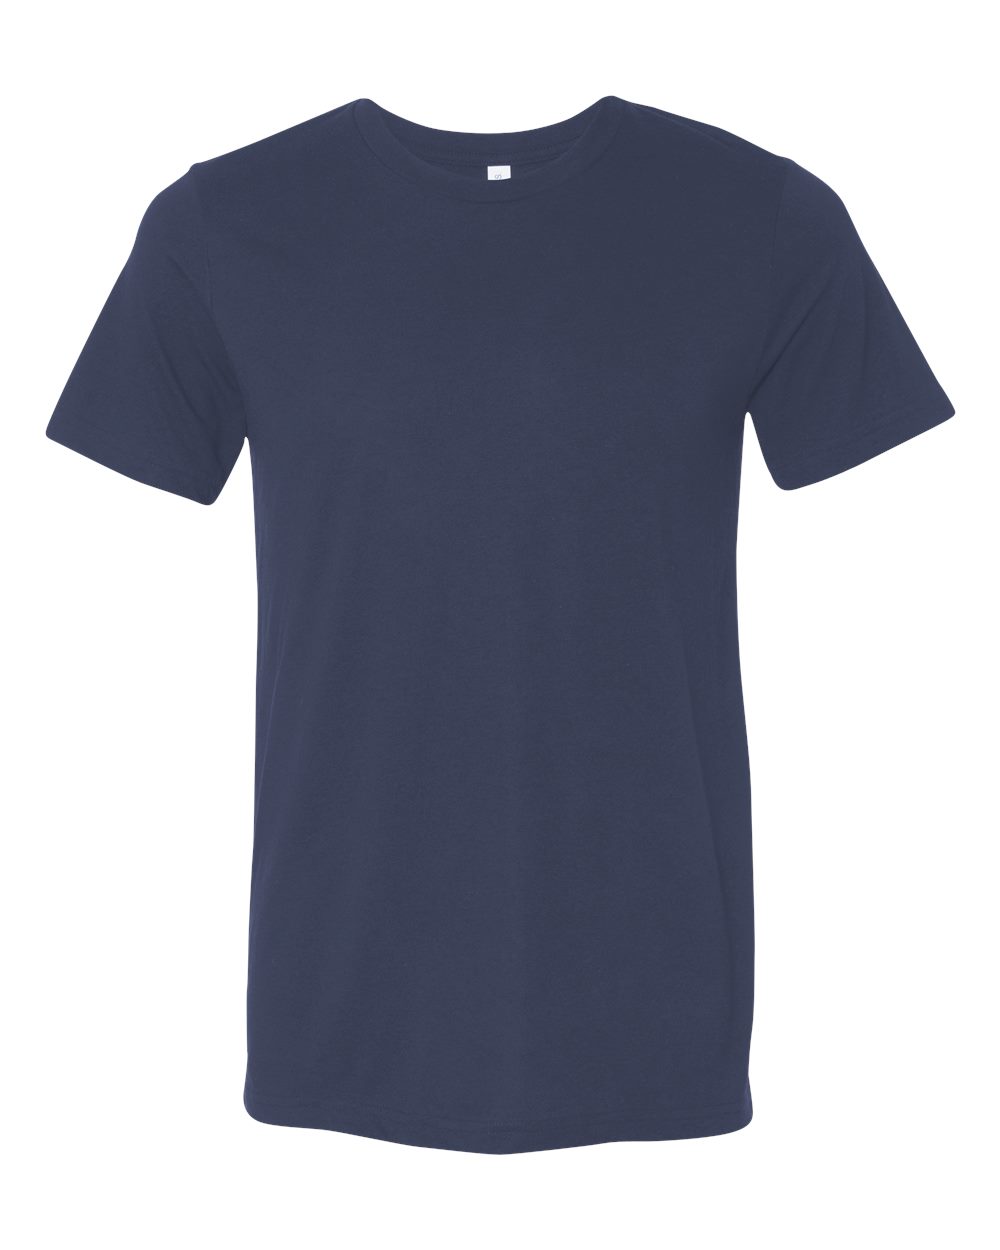 click to view Navy TriBlend